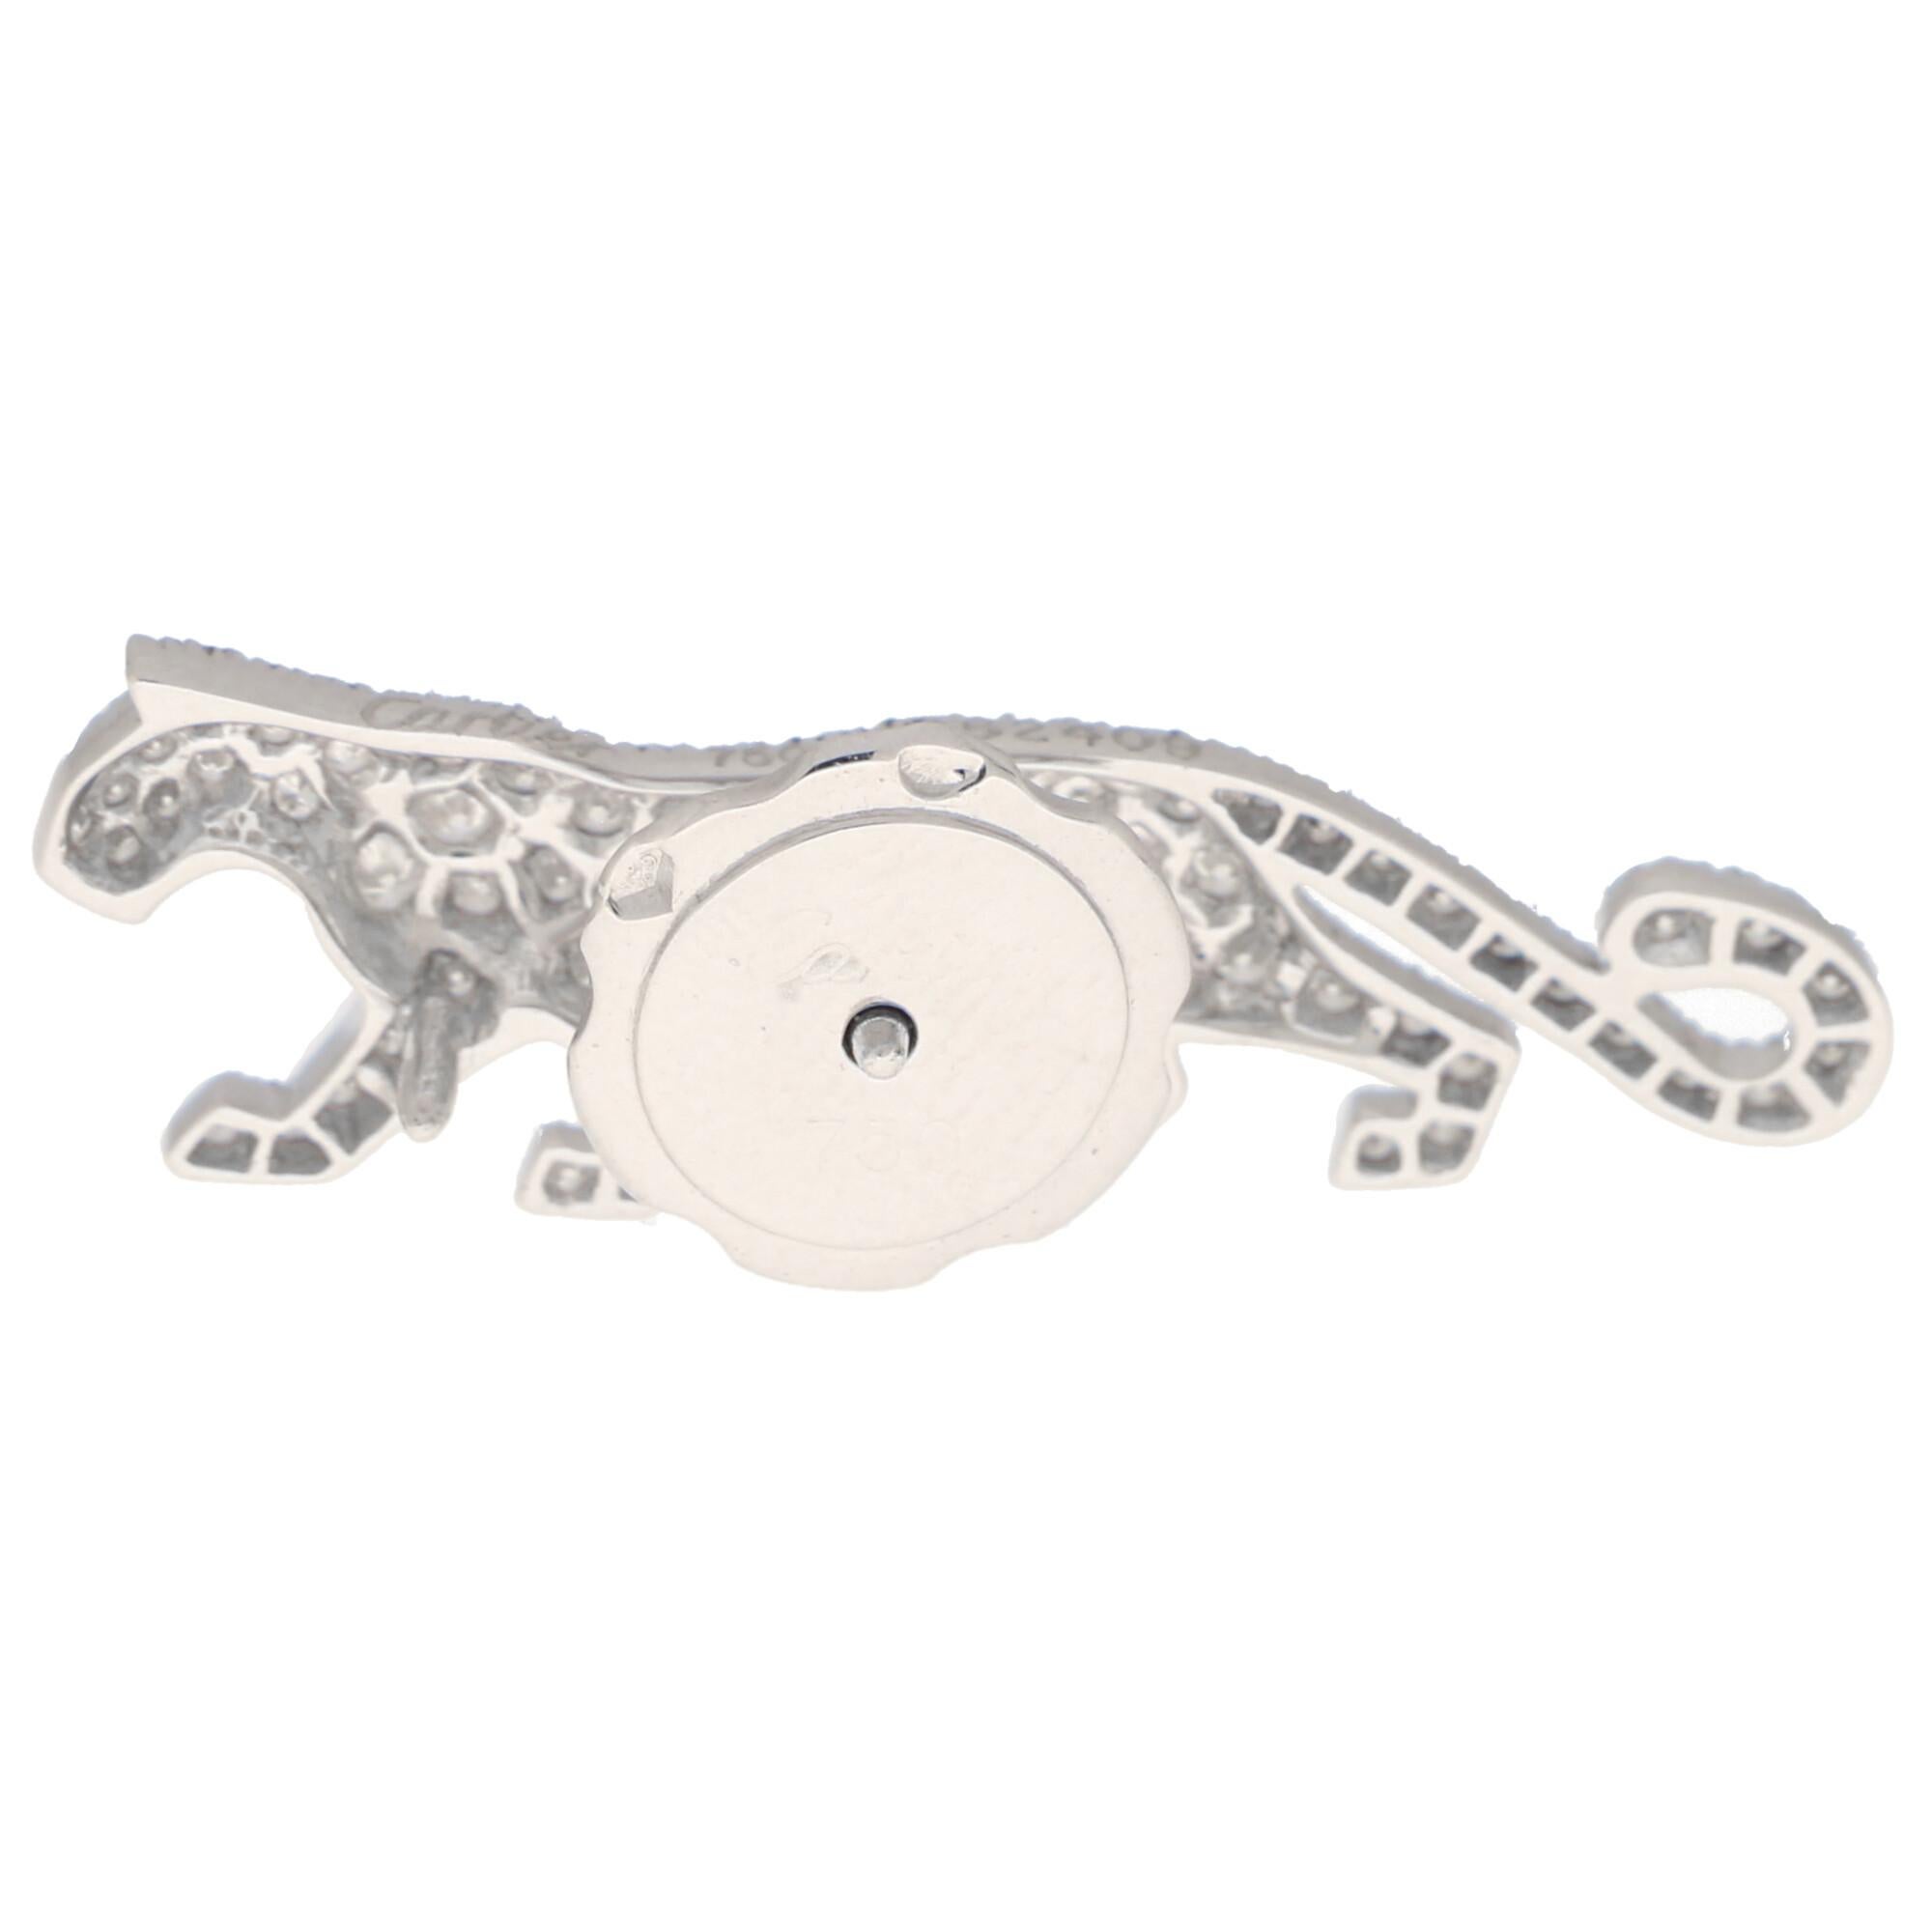 Rare Vintage Cartier Diamond Panther Pin Brooch in 18k White Gold 3